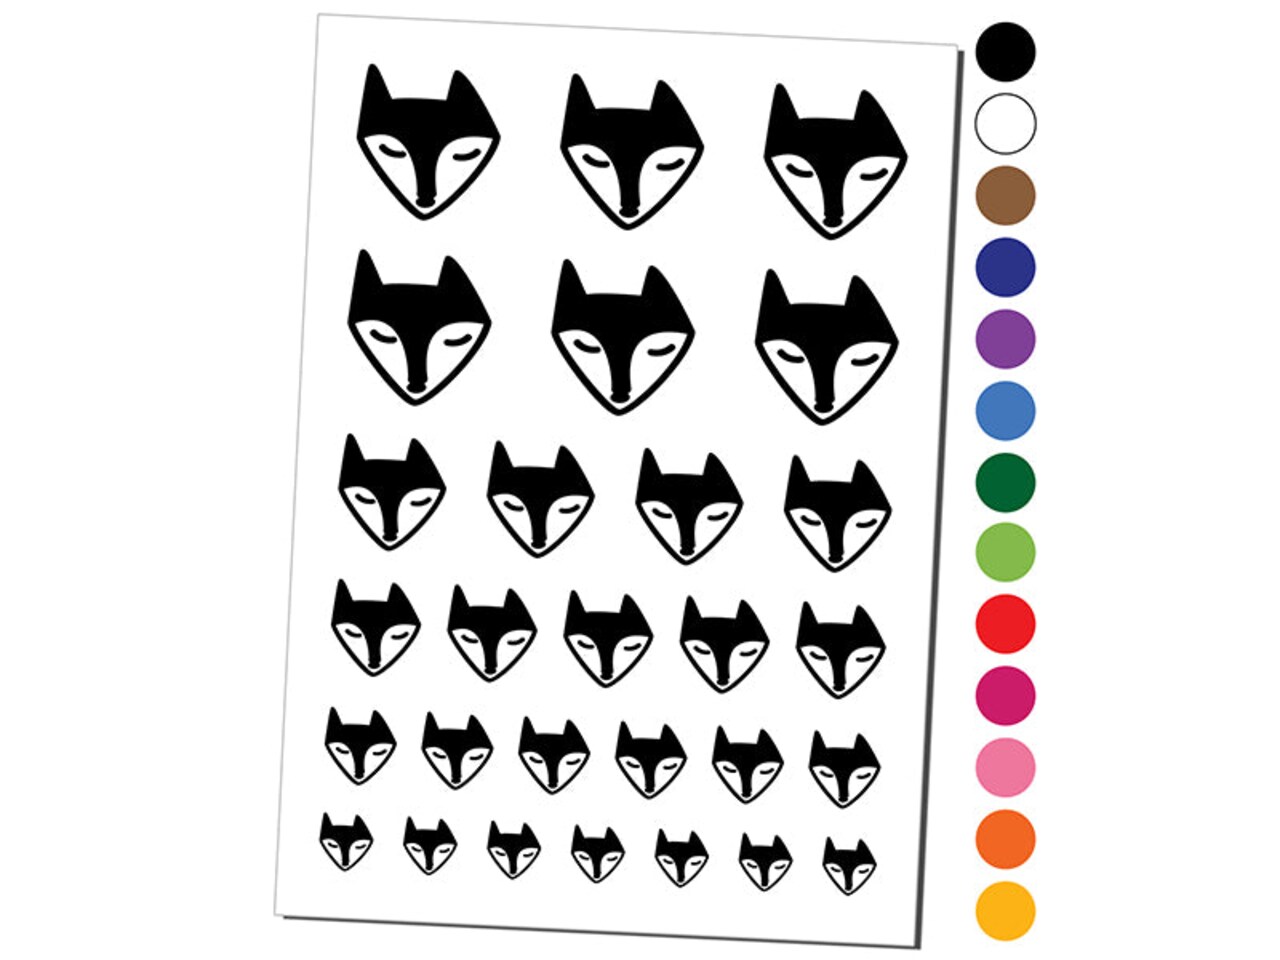 Resting Fox Face Temporary Tattoo Water Resistant Fake Body Art Set Collection